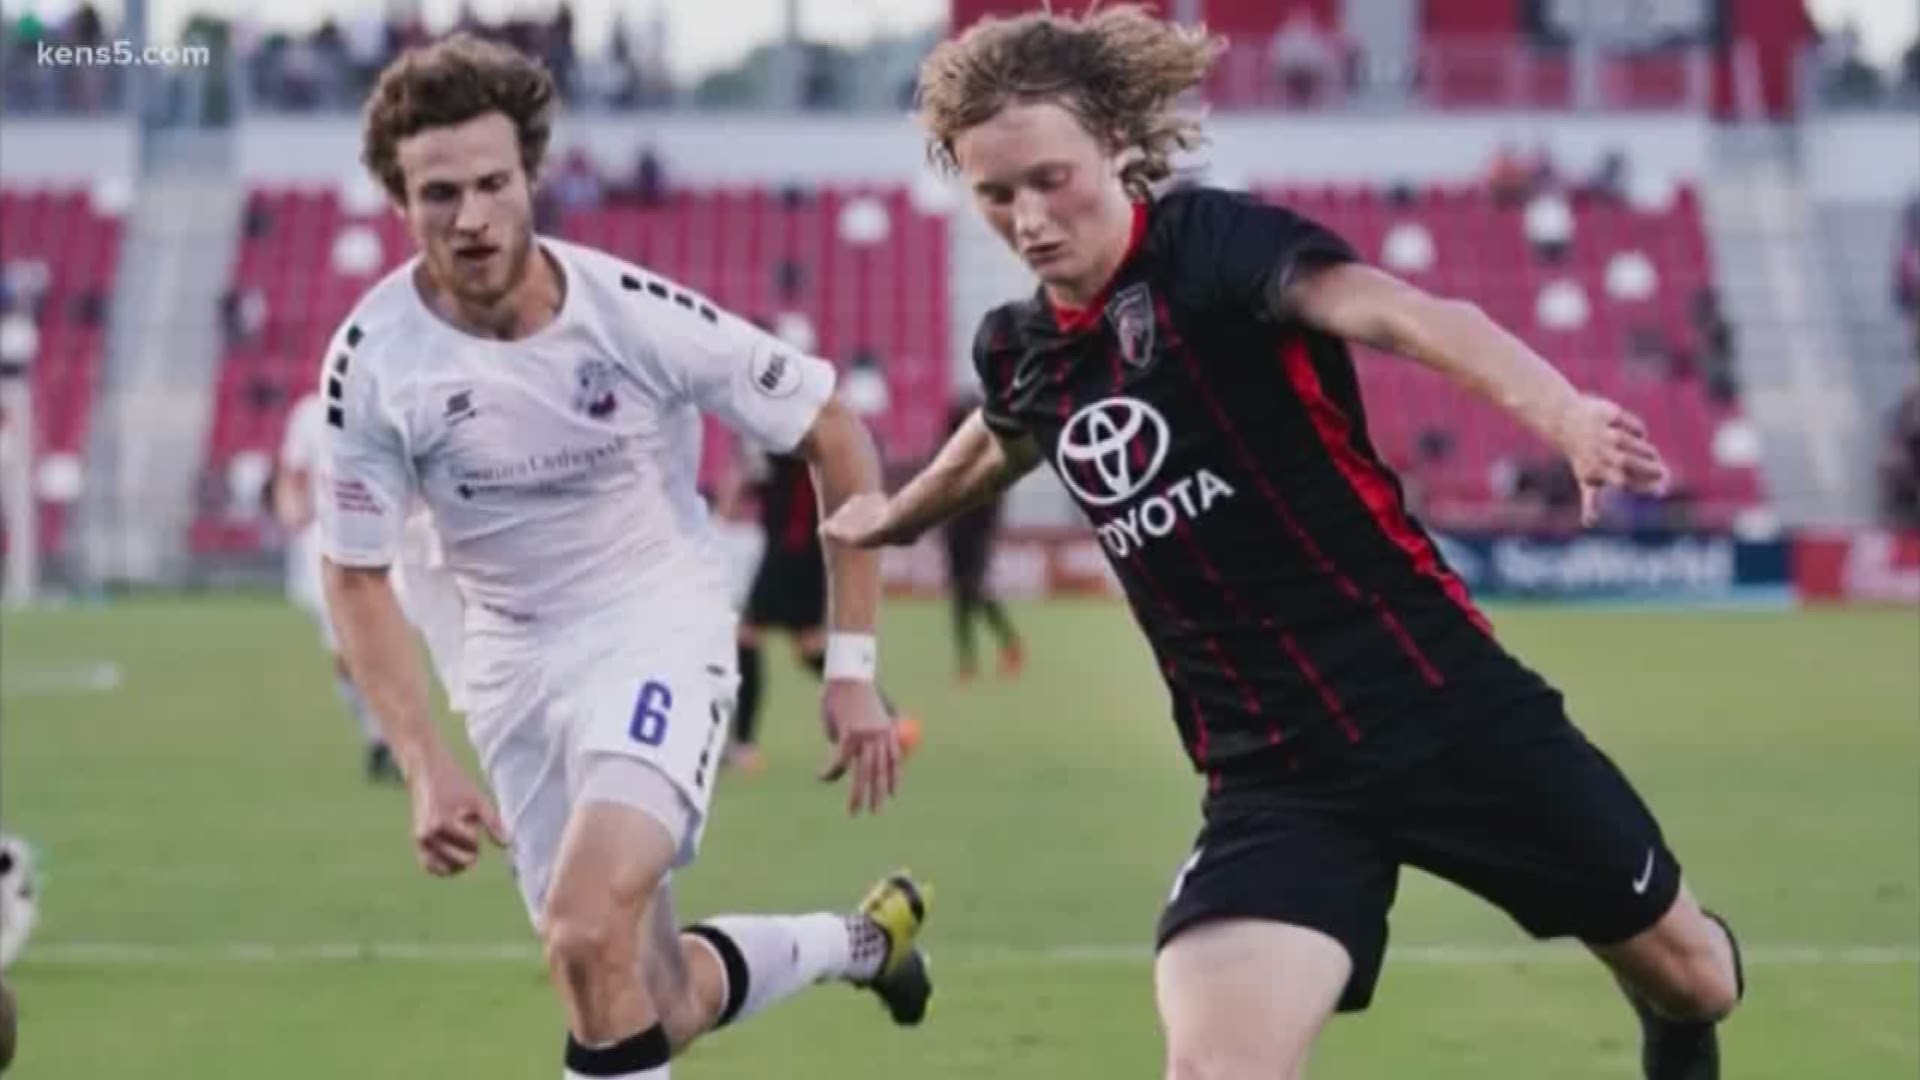 That kid you see at SAFC doesn't just look young, he is young. Midfielder Ethan Bryant is just 16 years old, living the dream of playing with a pro club.